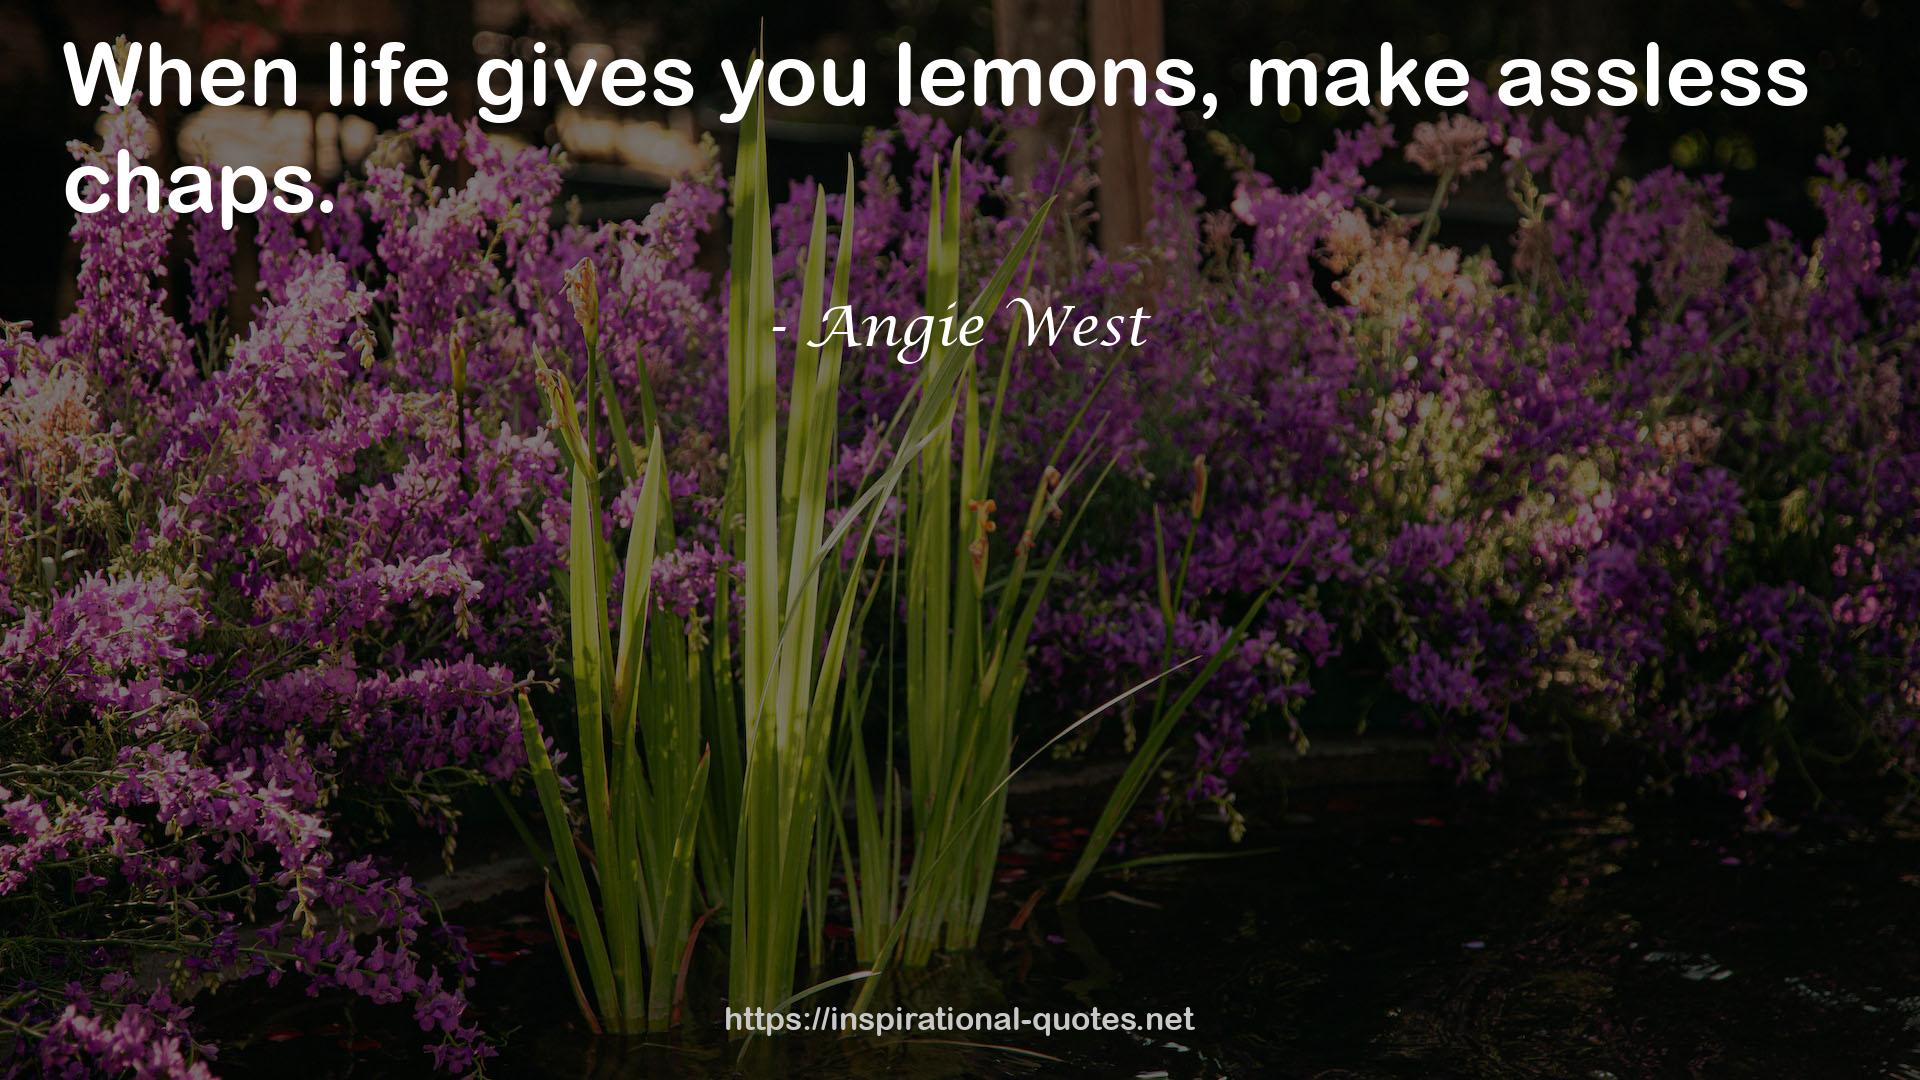 Angie West QUOTES